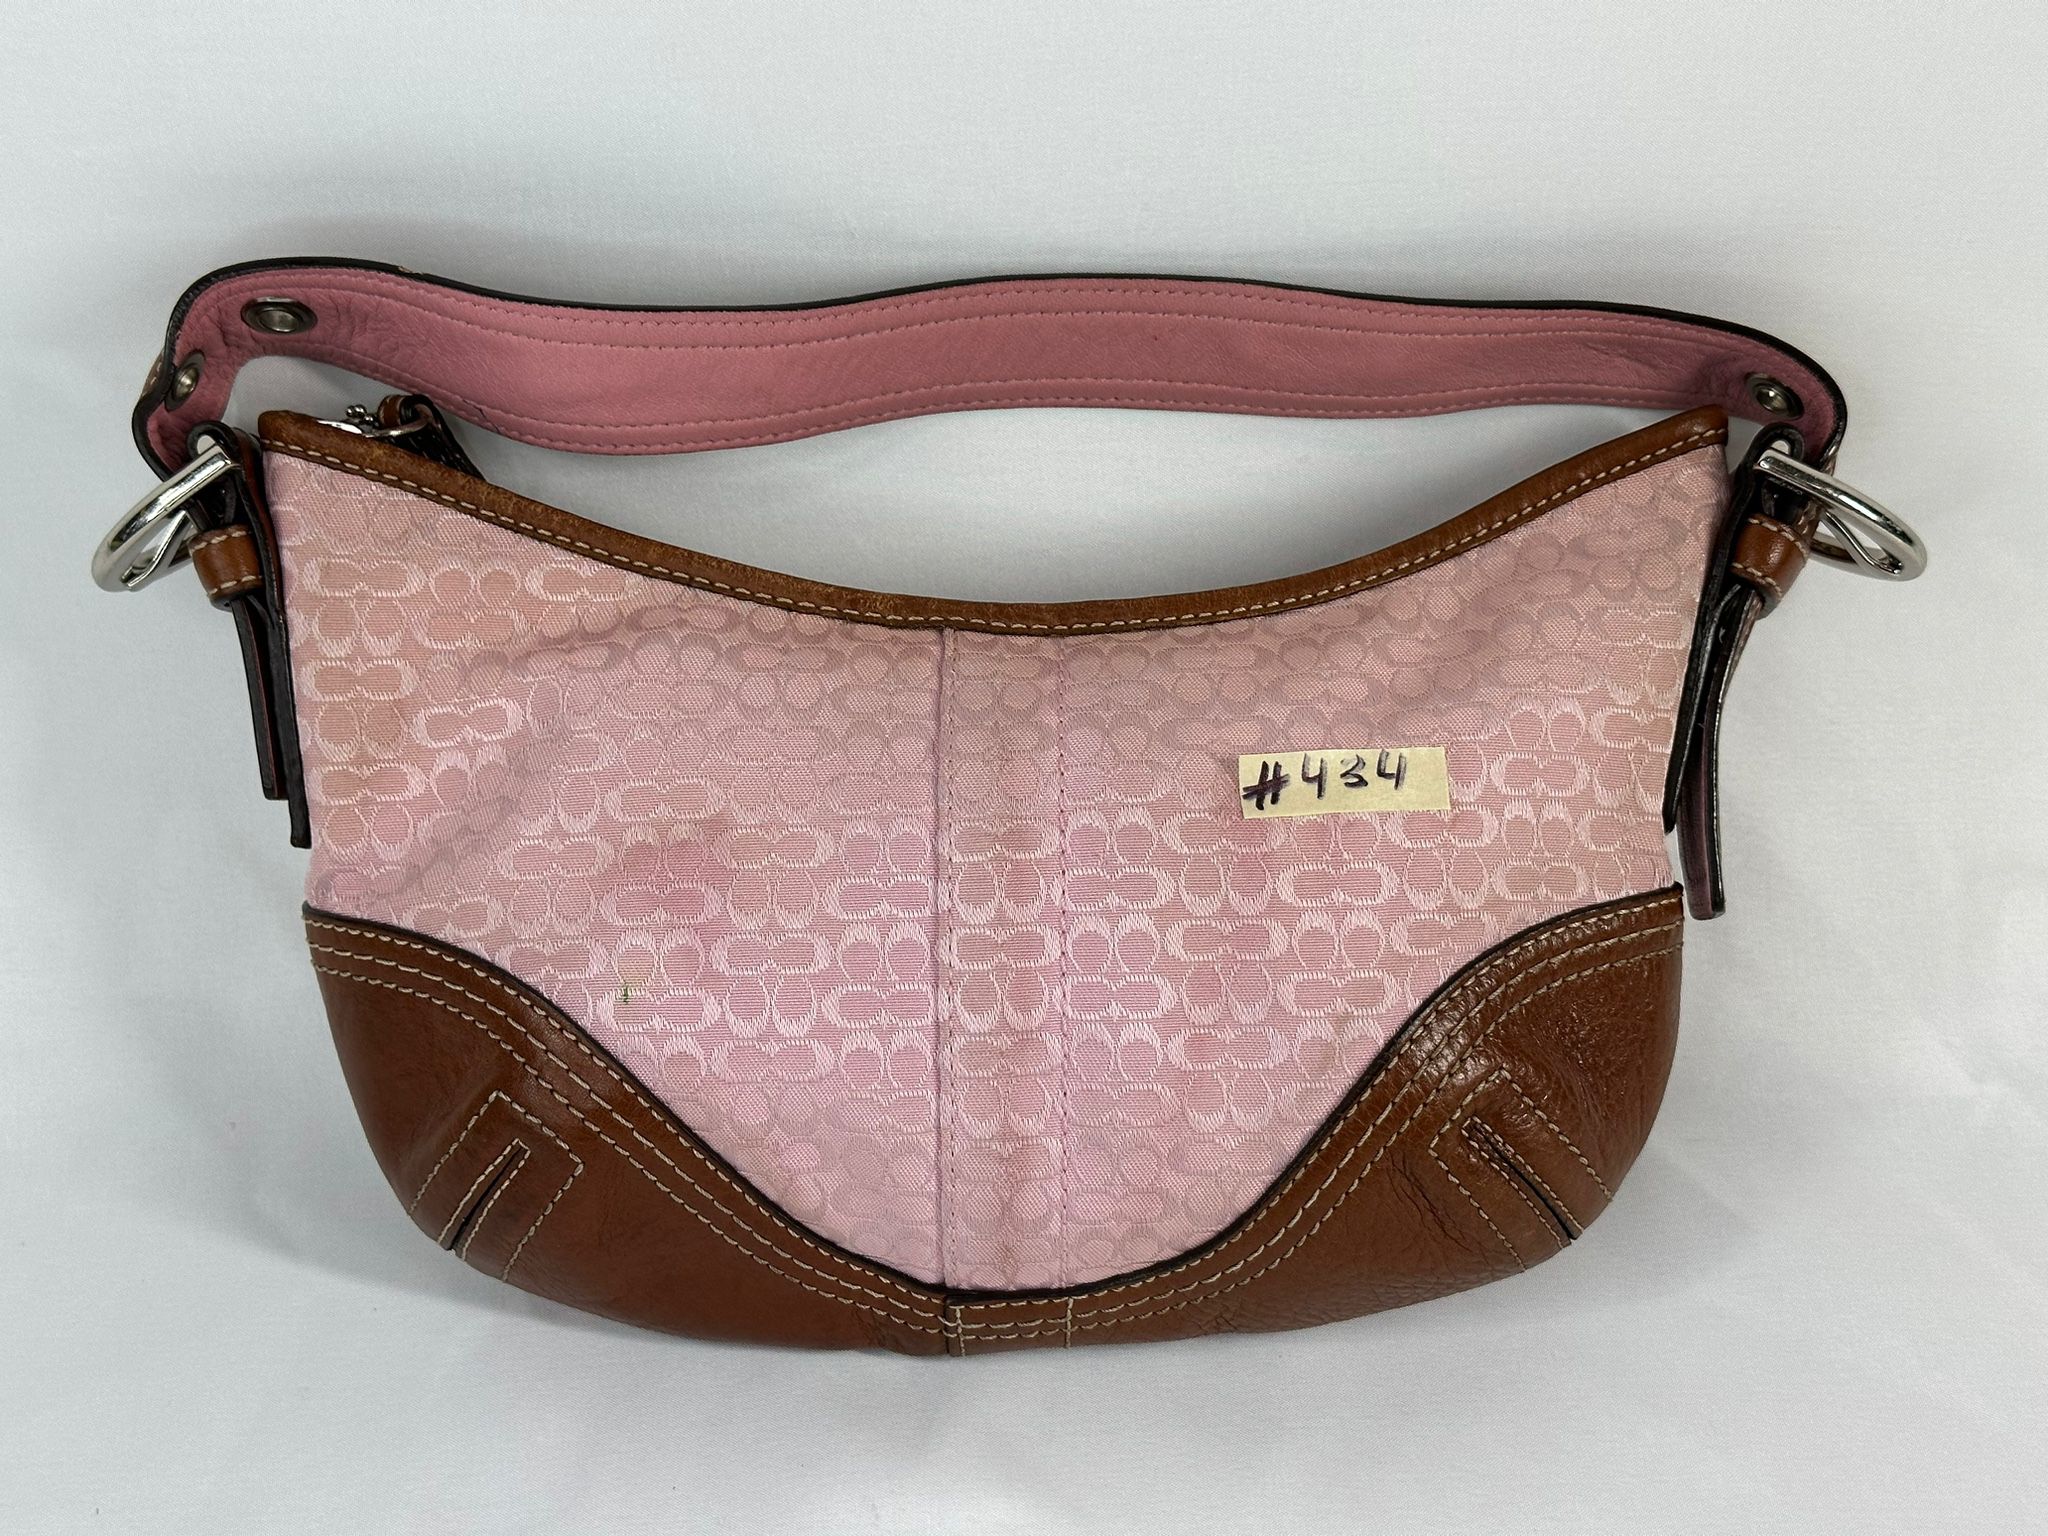 434 Genuine Vintage Coach Purse/ Bag PINK w/ Brown Leather №K0618 F02154  for Sale in Littleton, CO - OfferUp